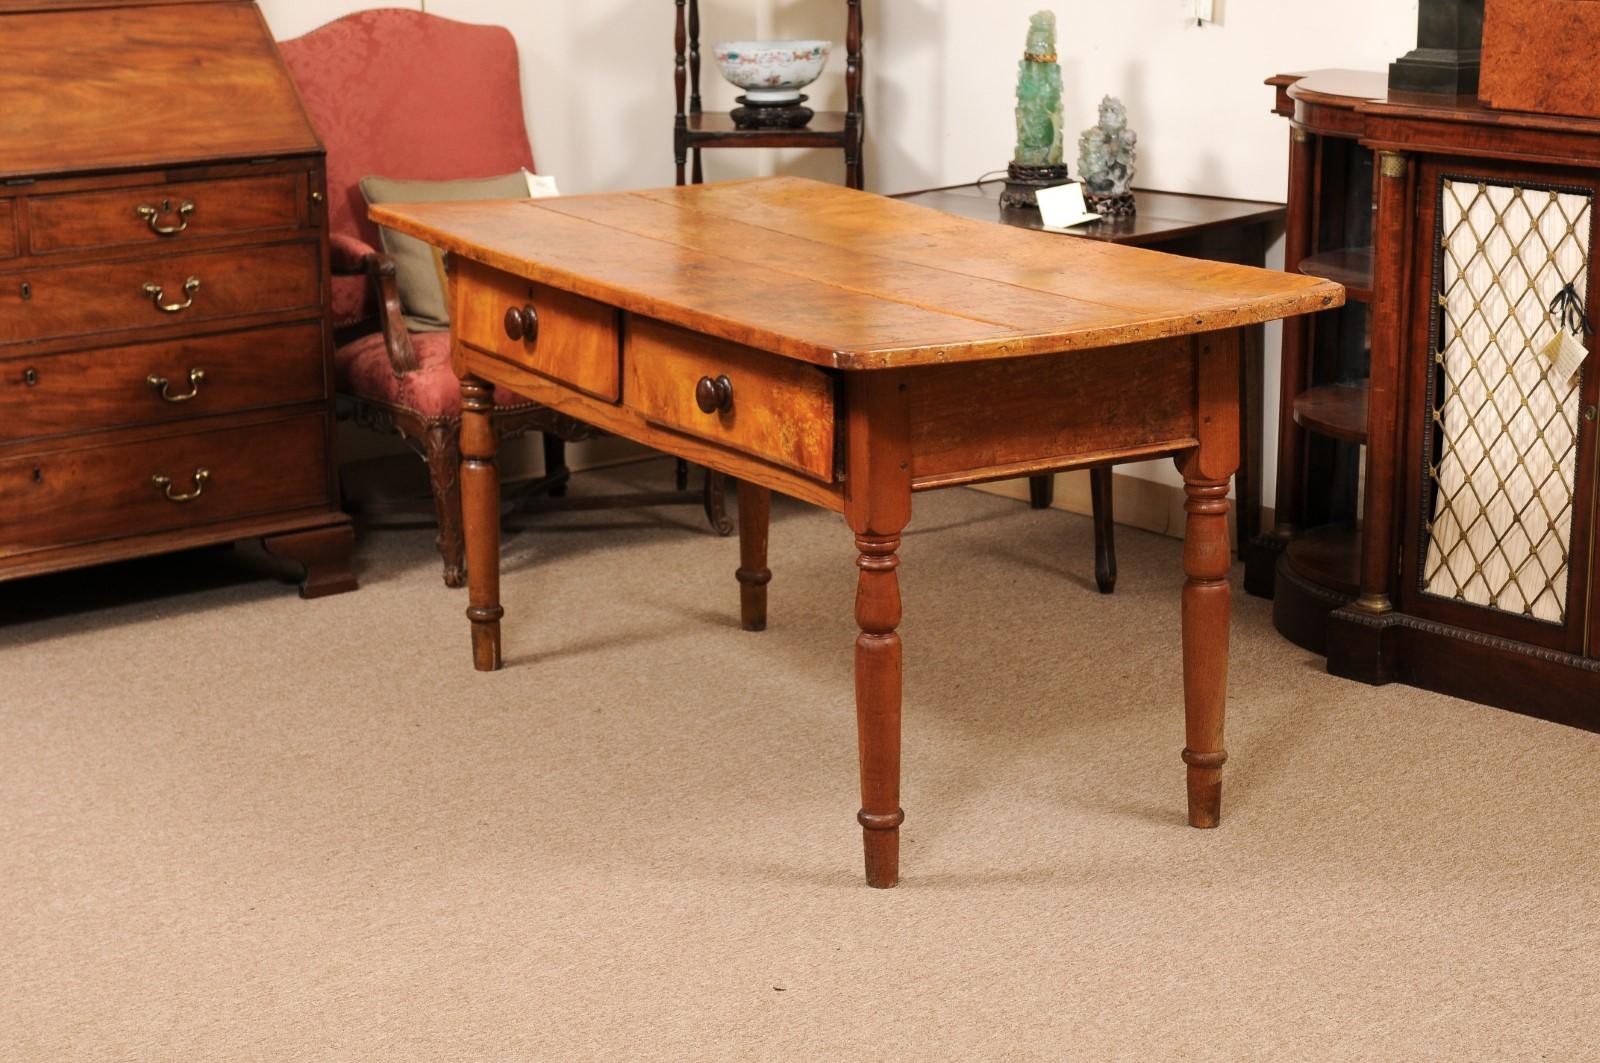 Large American Pine Kitchen Table with 2 Deep Drawers and Turned Legs, c1890 For Sale 7